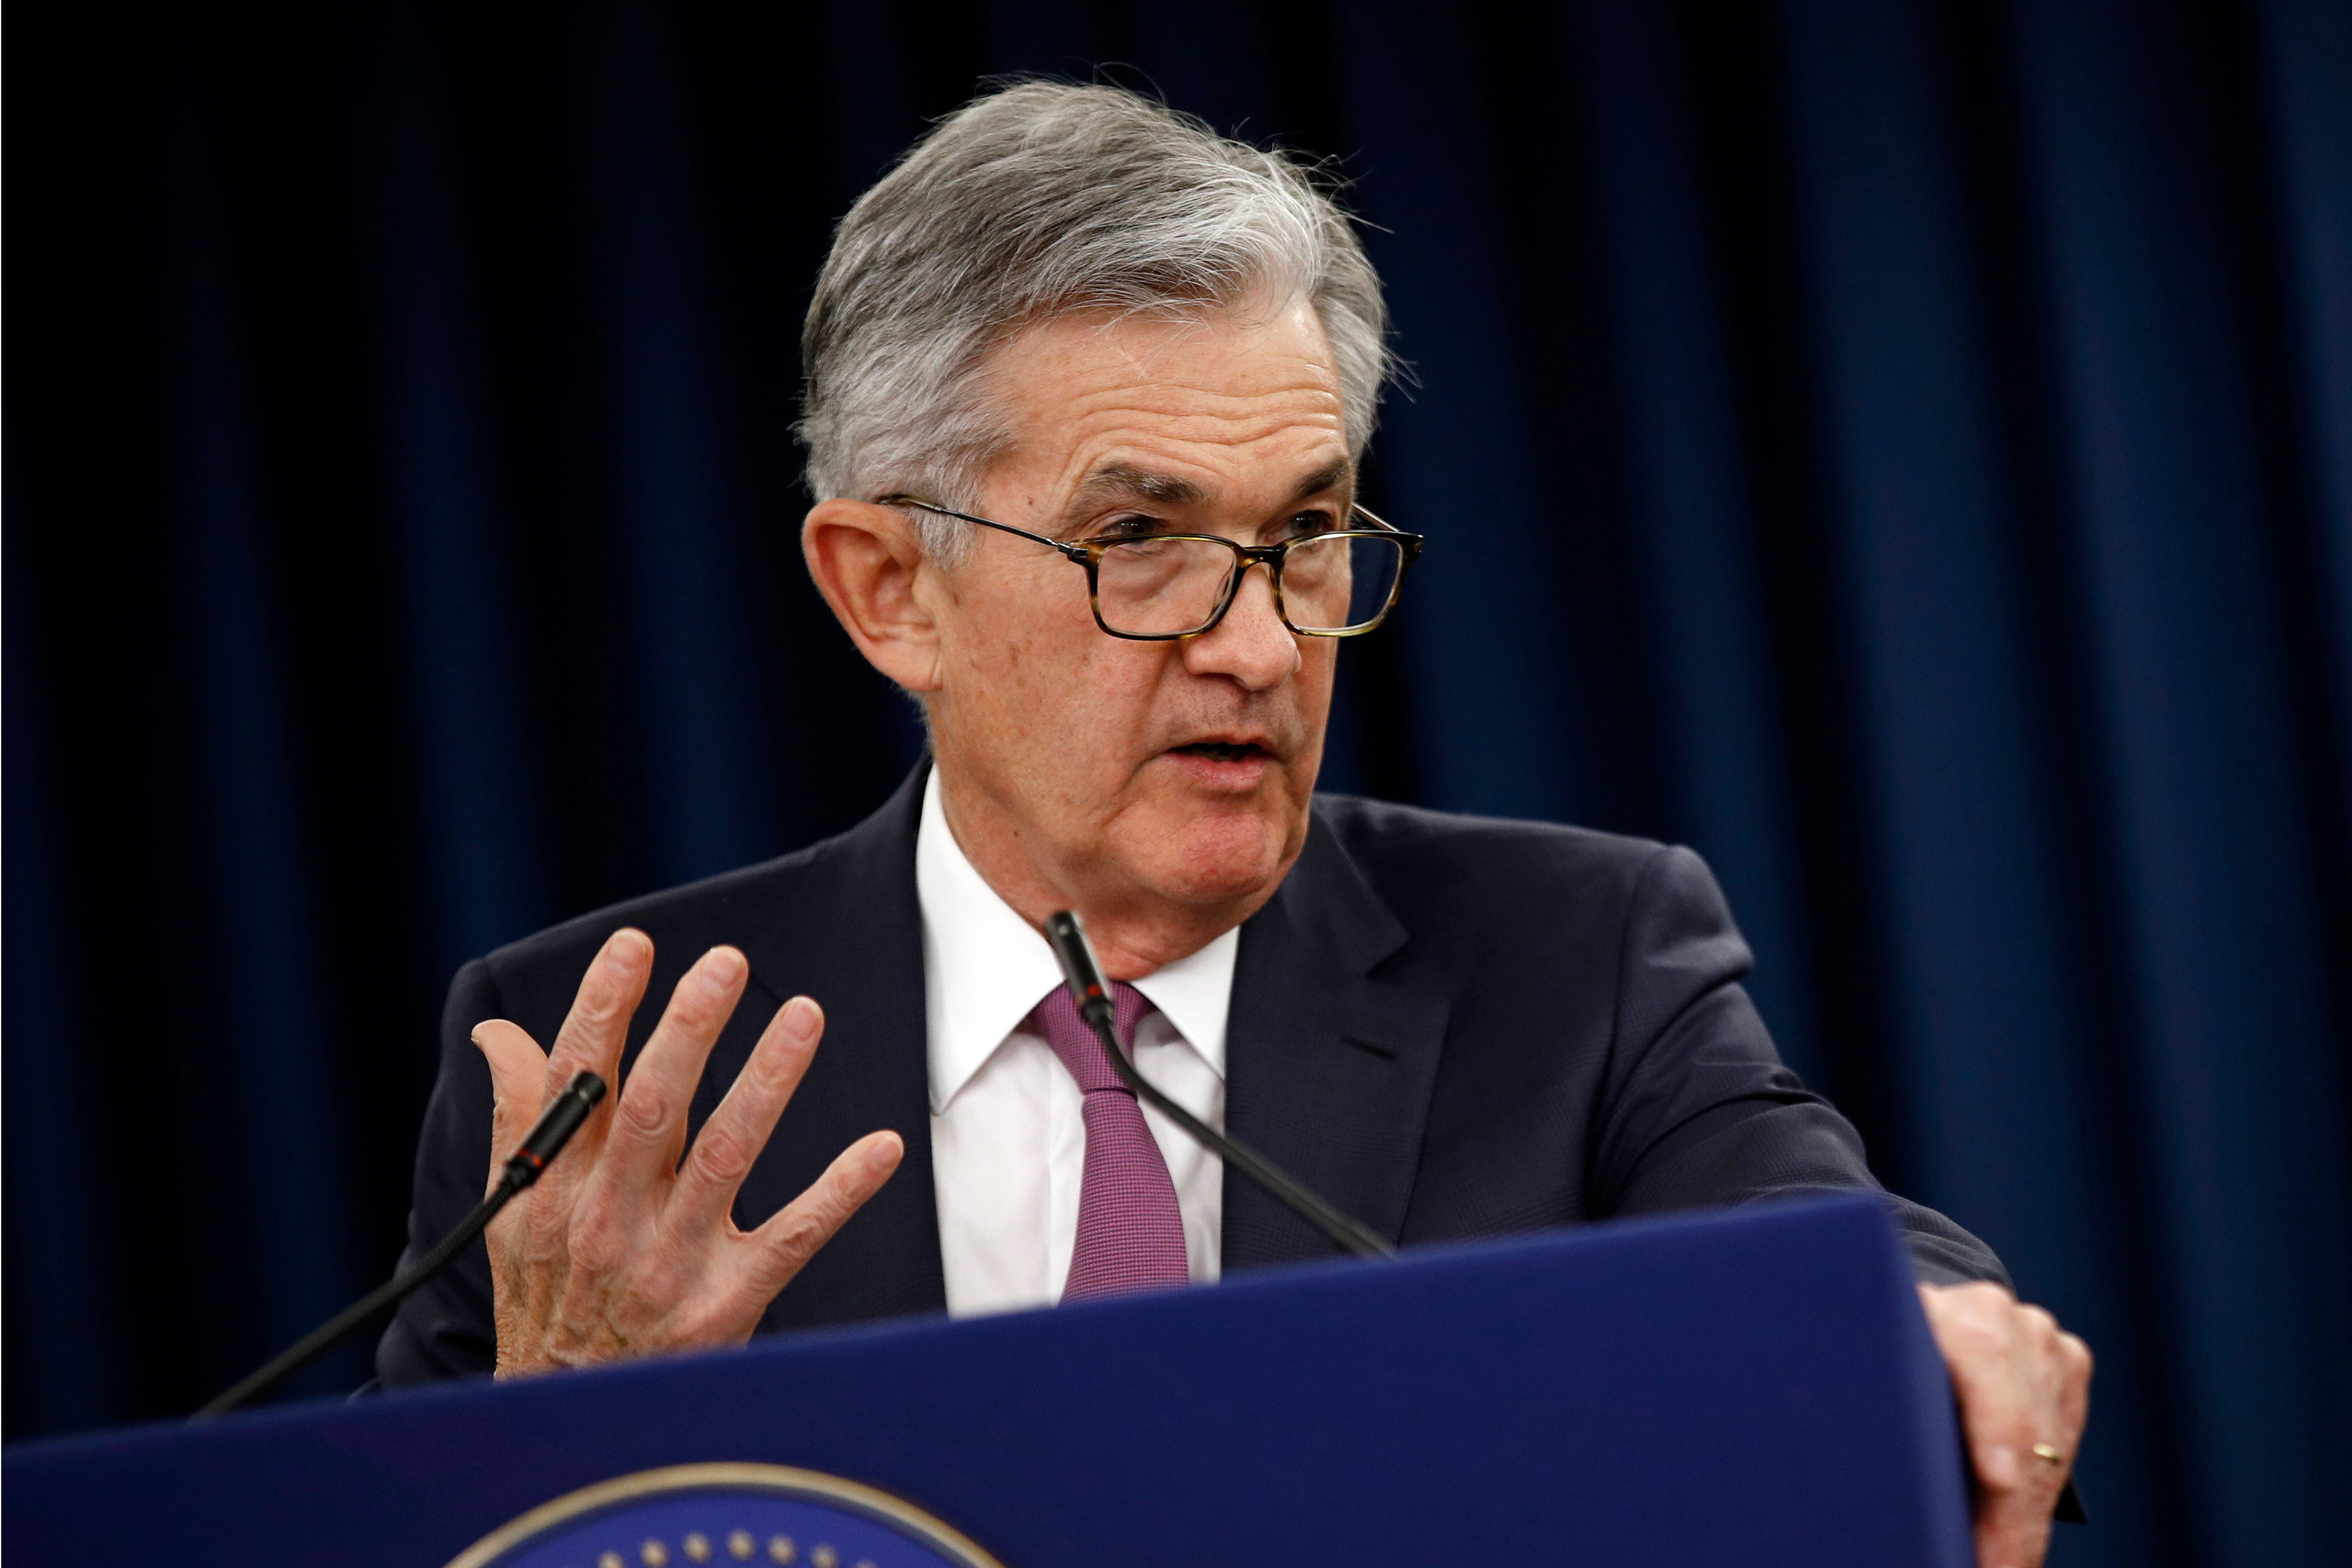 The Federal Reserve, headed by Jerome Powell, is projected to have purchased $3.5 trillion in government securities by the end of 2020 with newly created dollars, one of many tools it is using to help prop up the ailing economy during the COVID-19 pandemic.